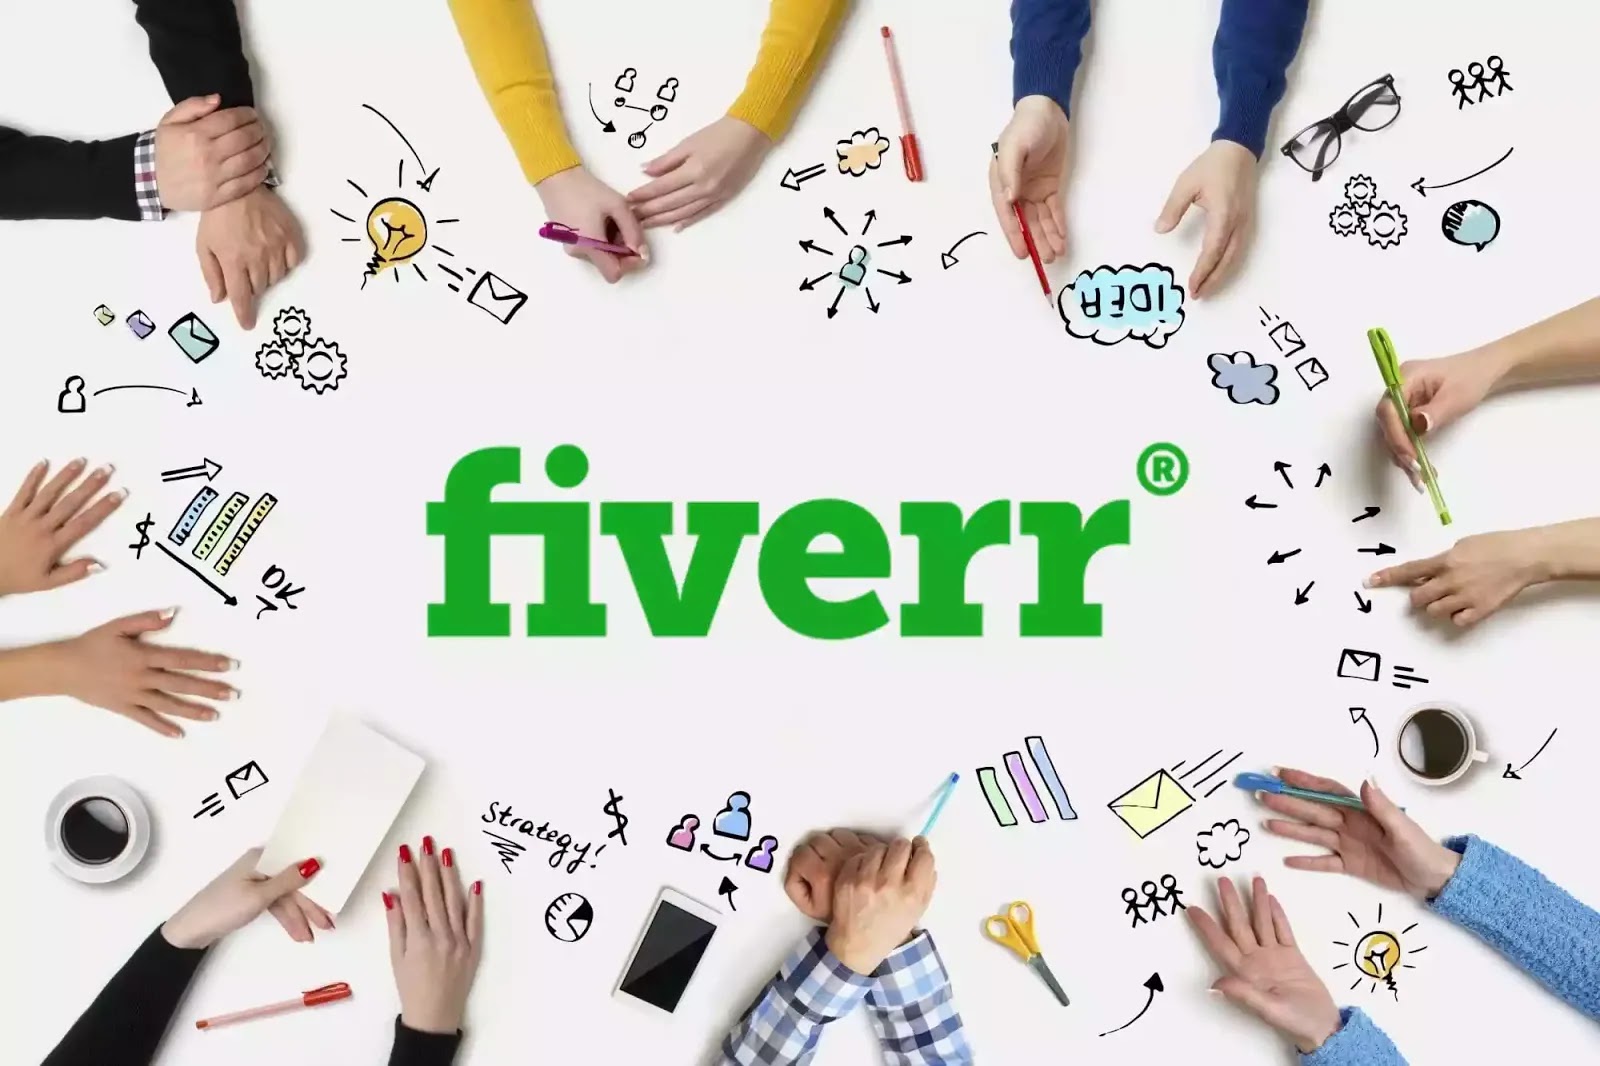 Fiverr Advantages and Disadvantages: An In-Depth Look